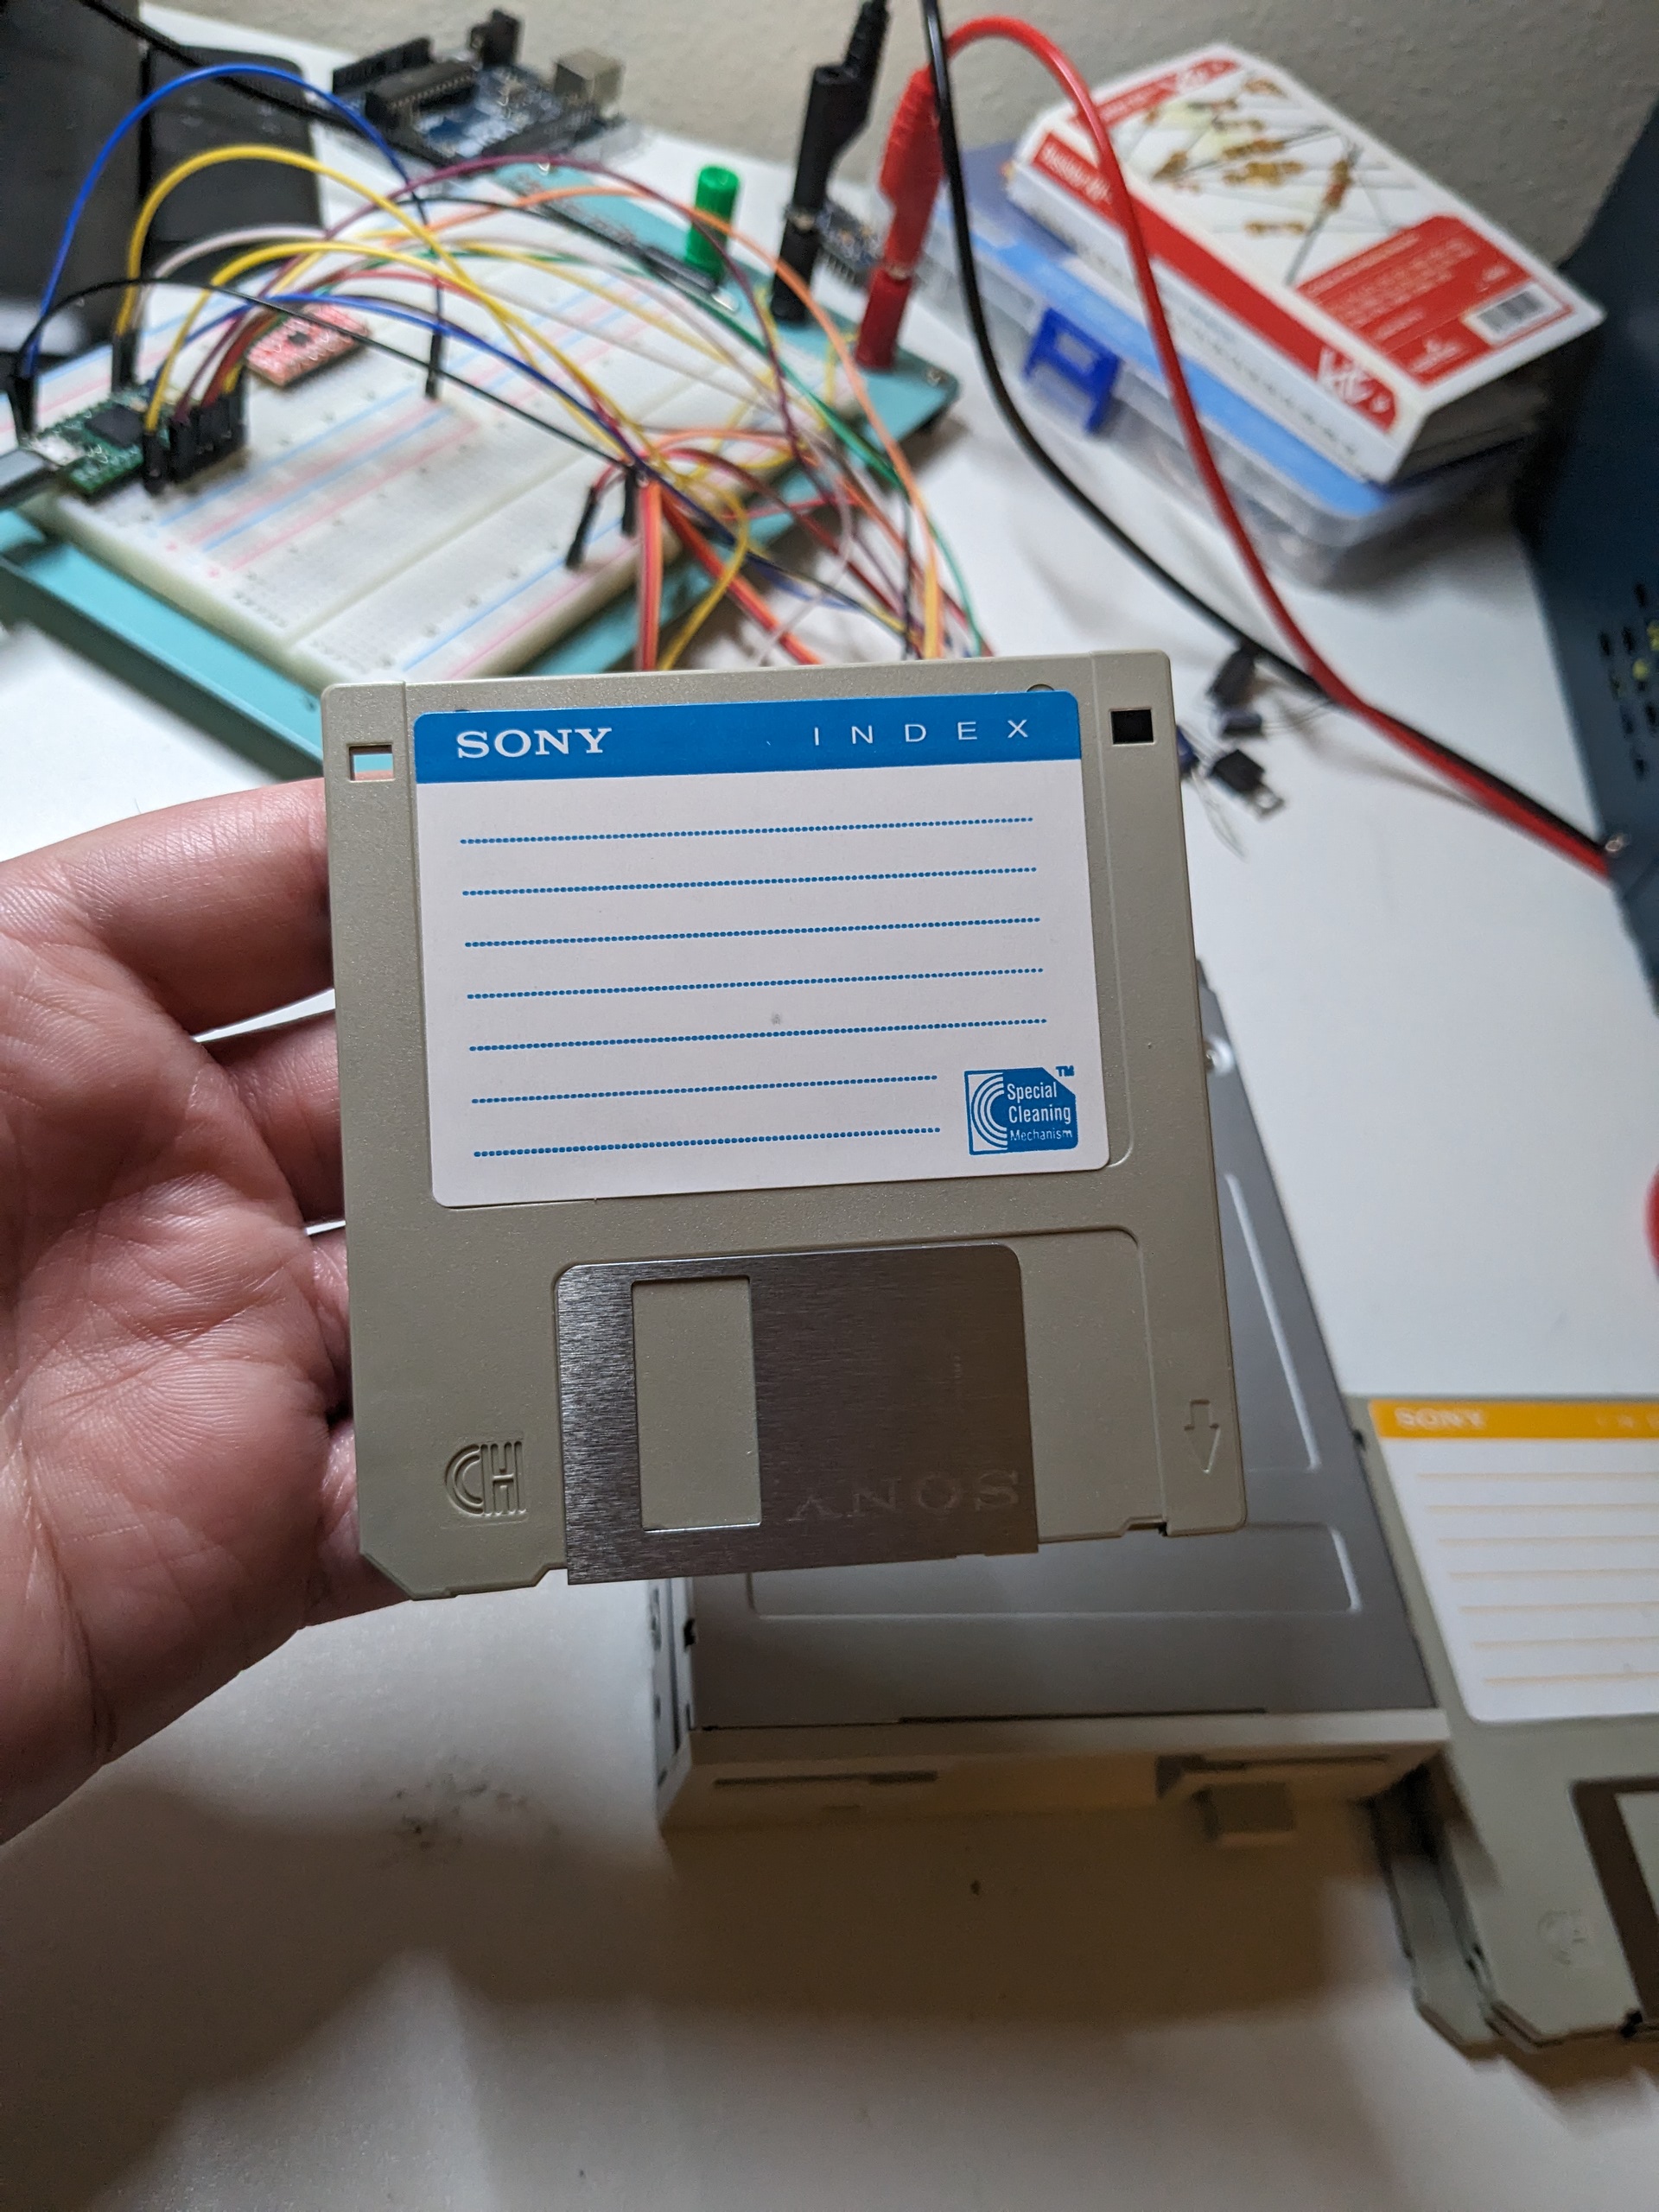 A blue floppy disk being held over a floppy drive